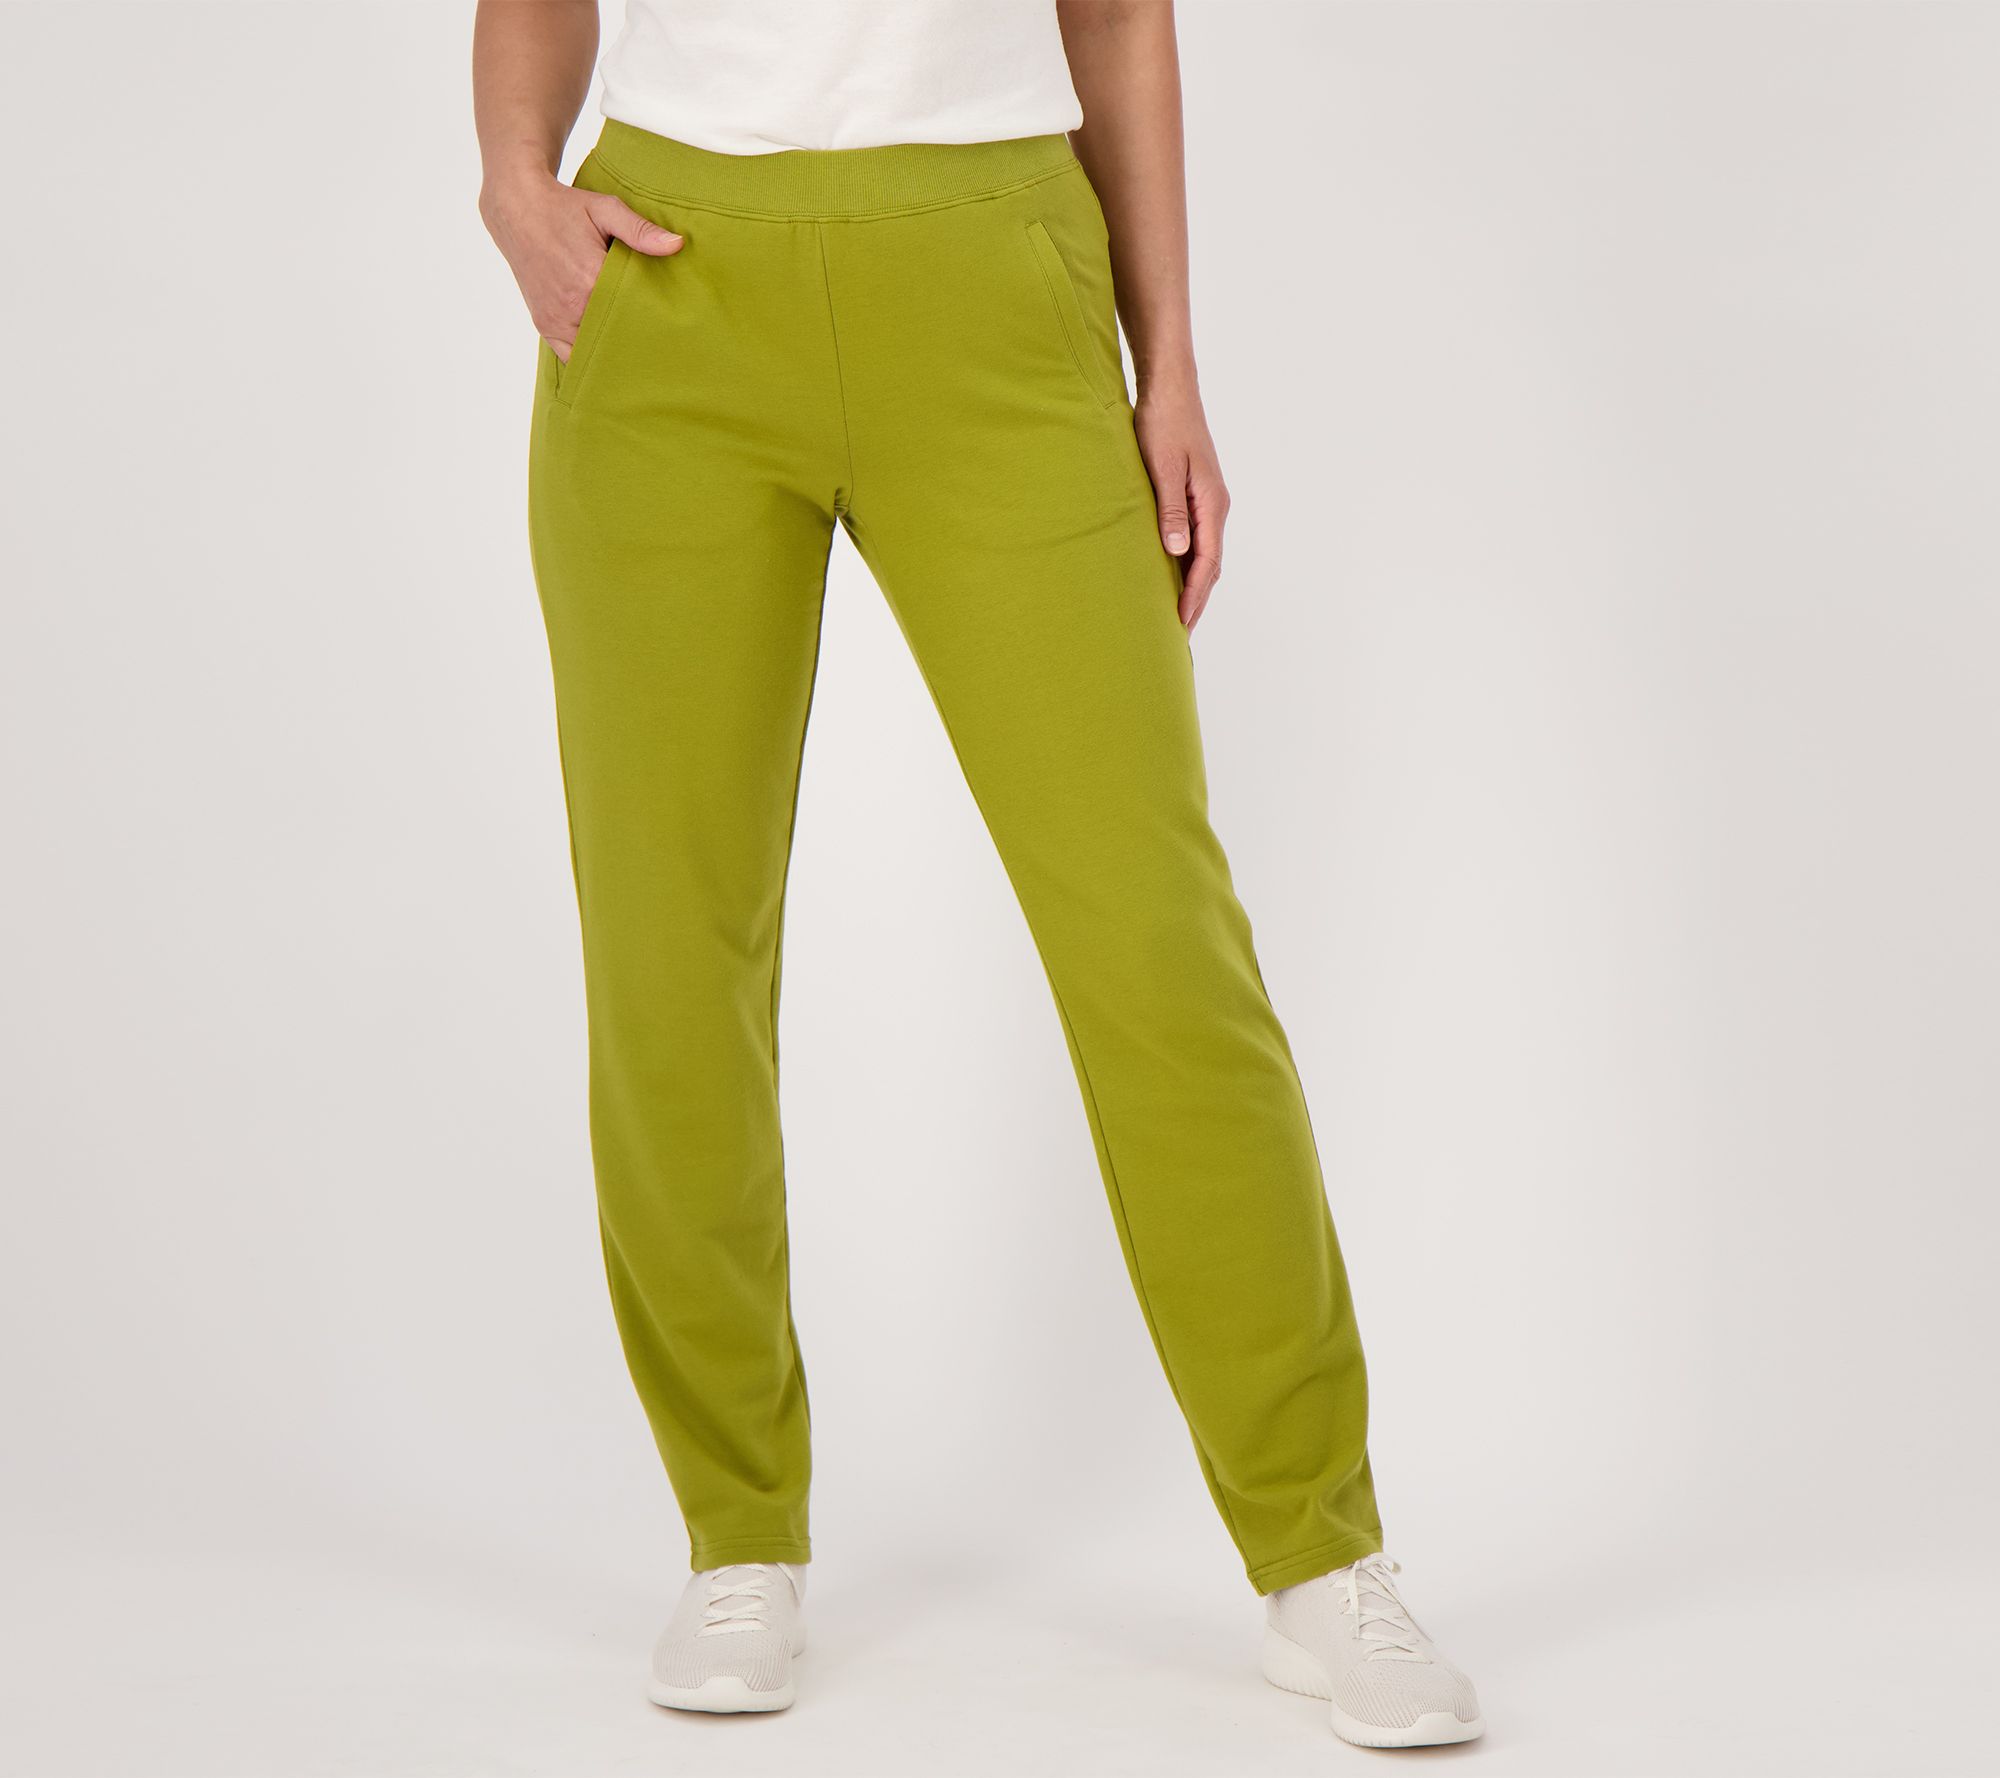 Women's Basic Knit Pull-On Pants Available in Regular and Petite 